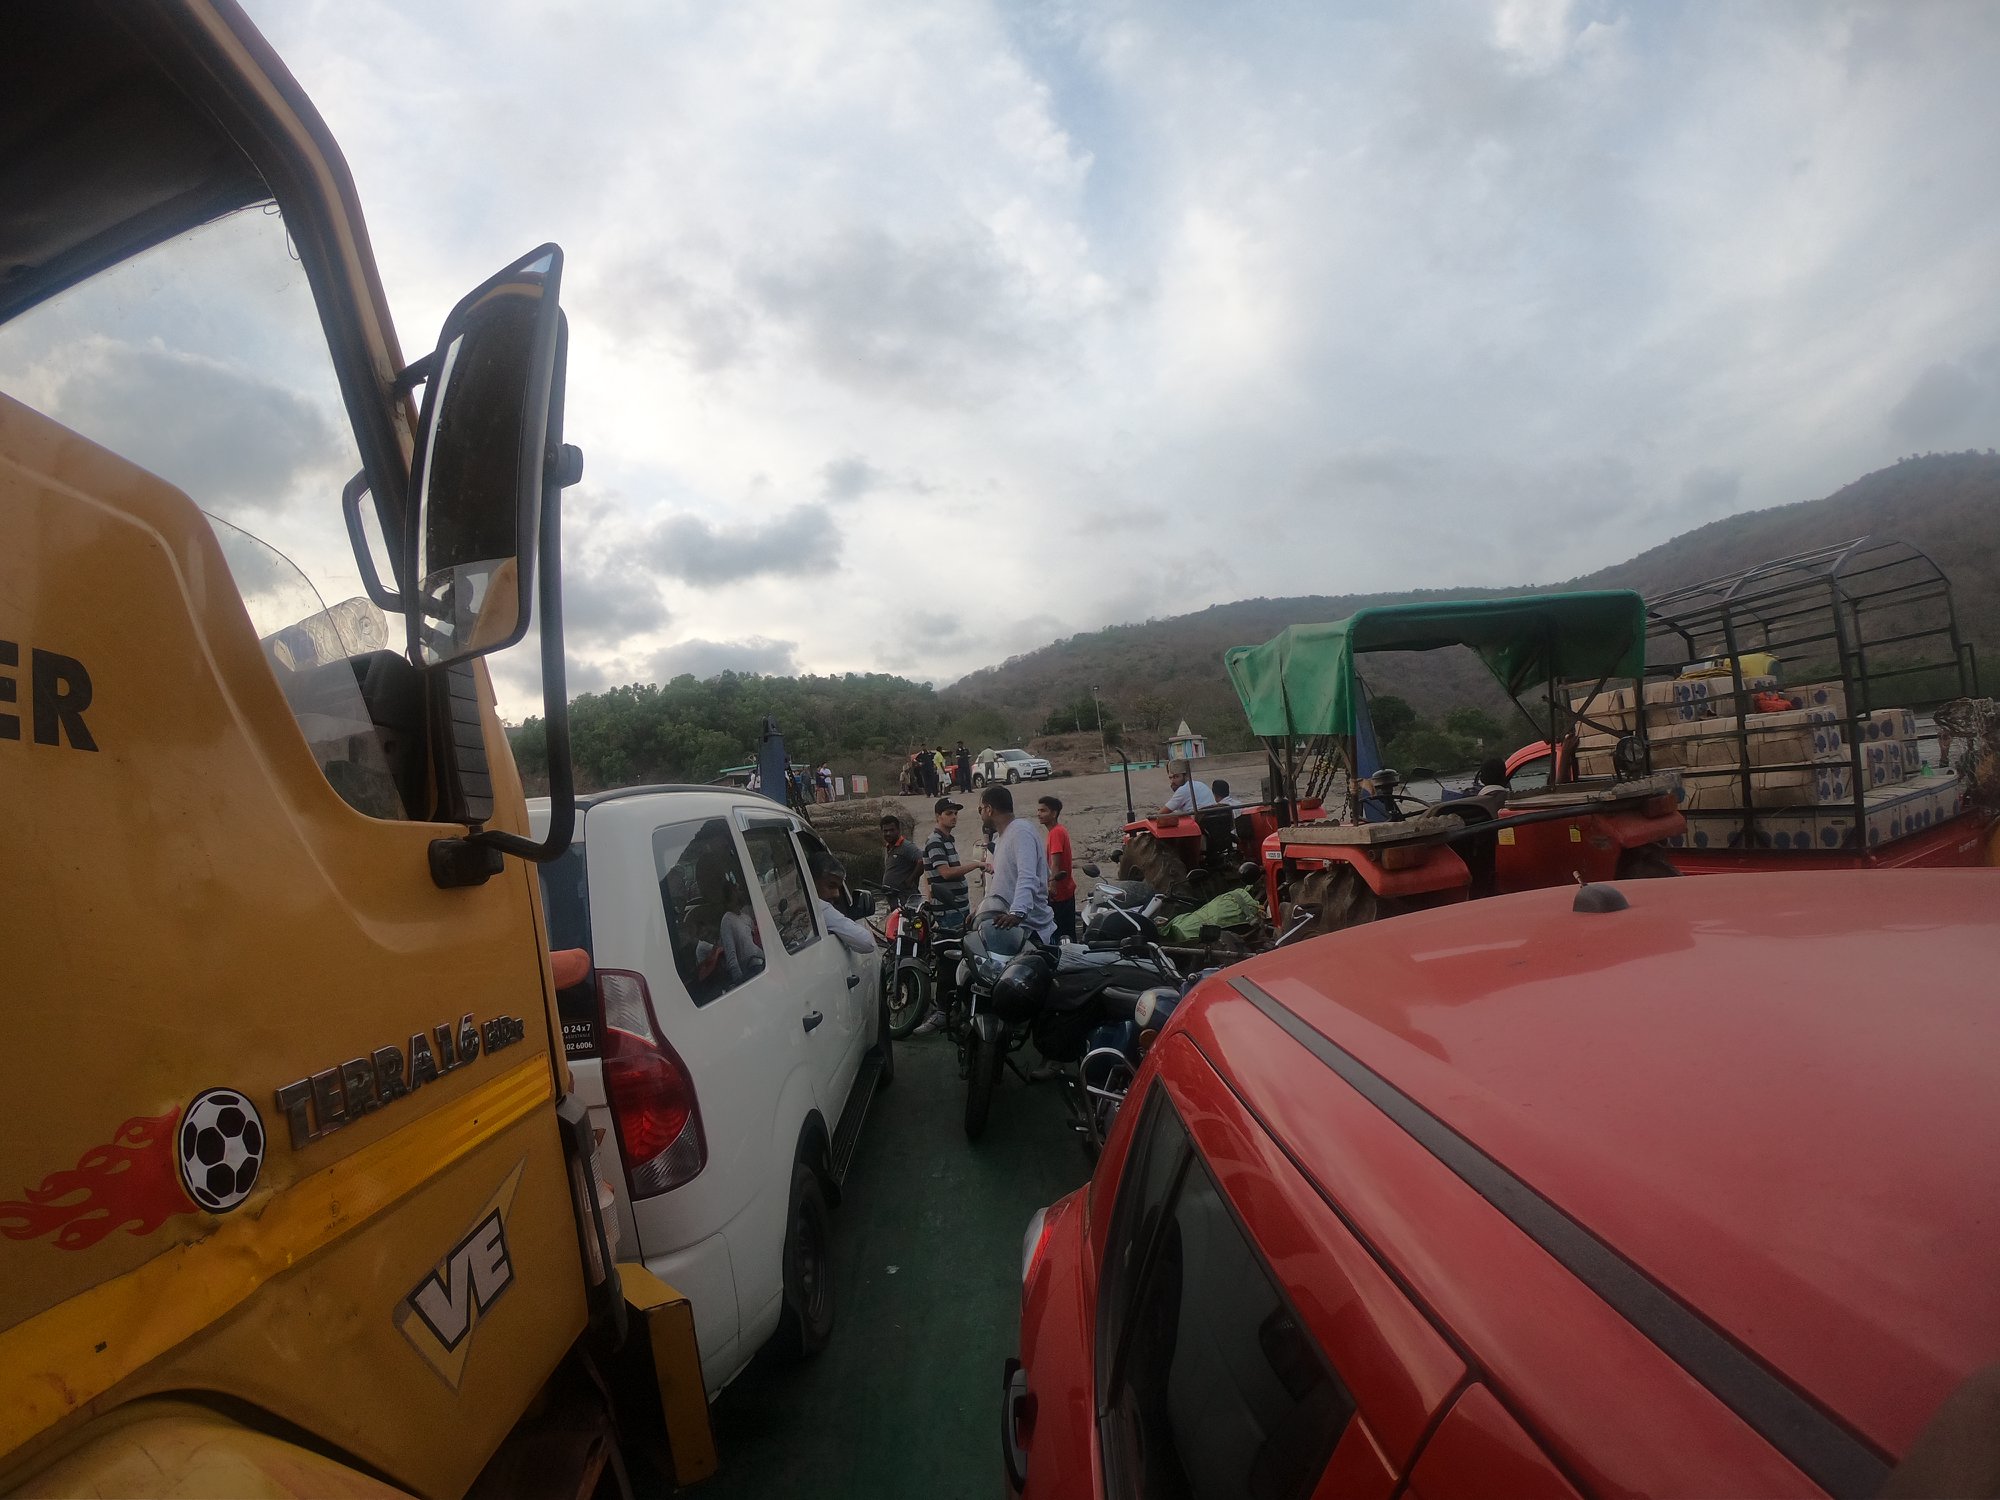 Jammed on all sides in the Bagmandala Ferry